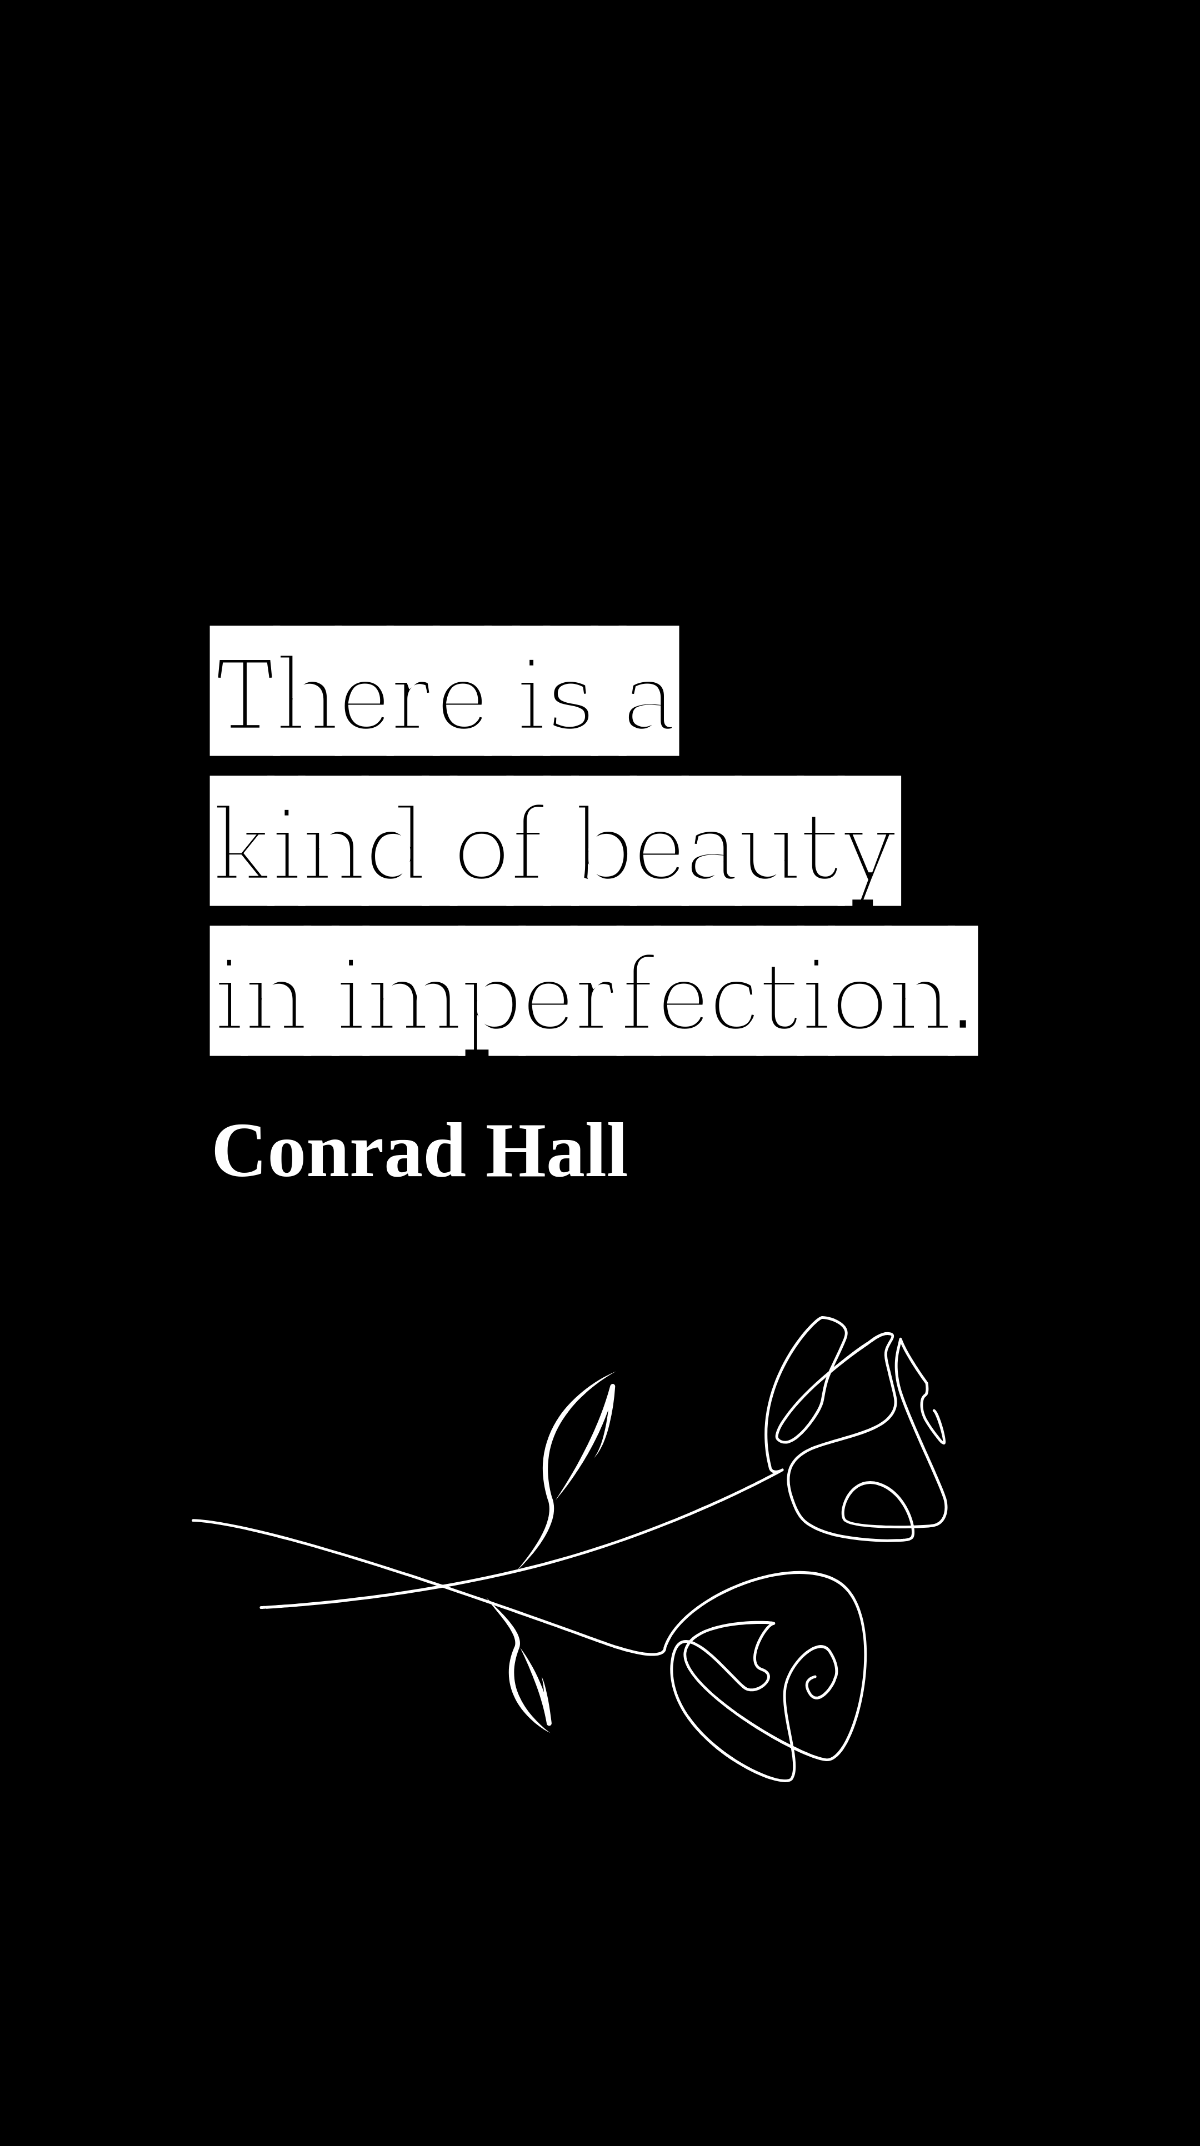 Conrad Hall - There is a kind of beauty in imperfection. Template